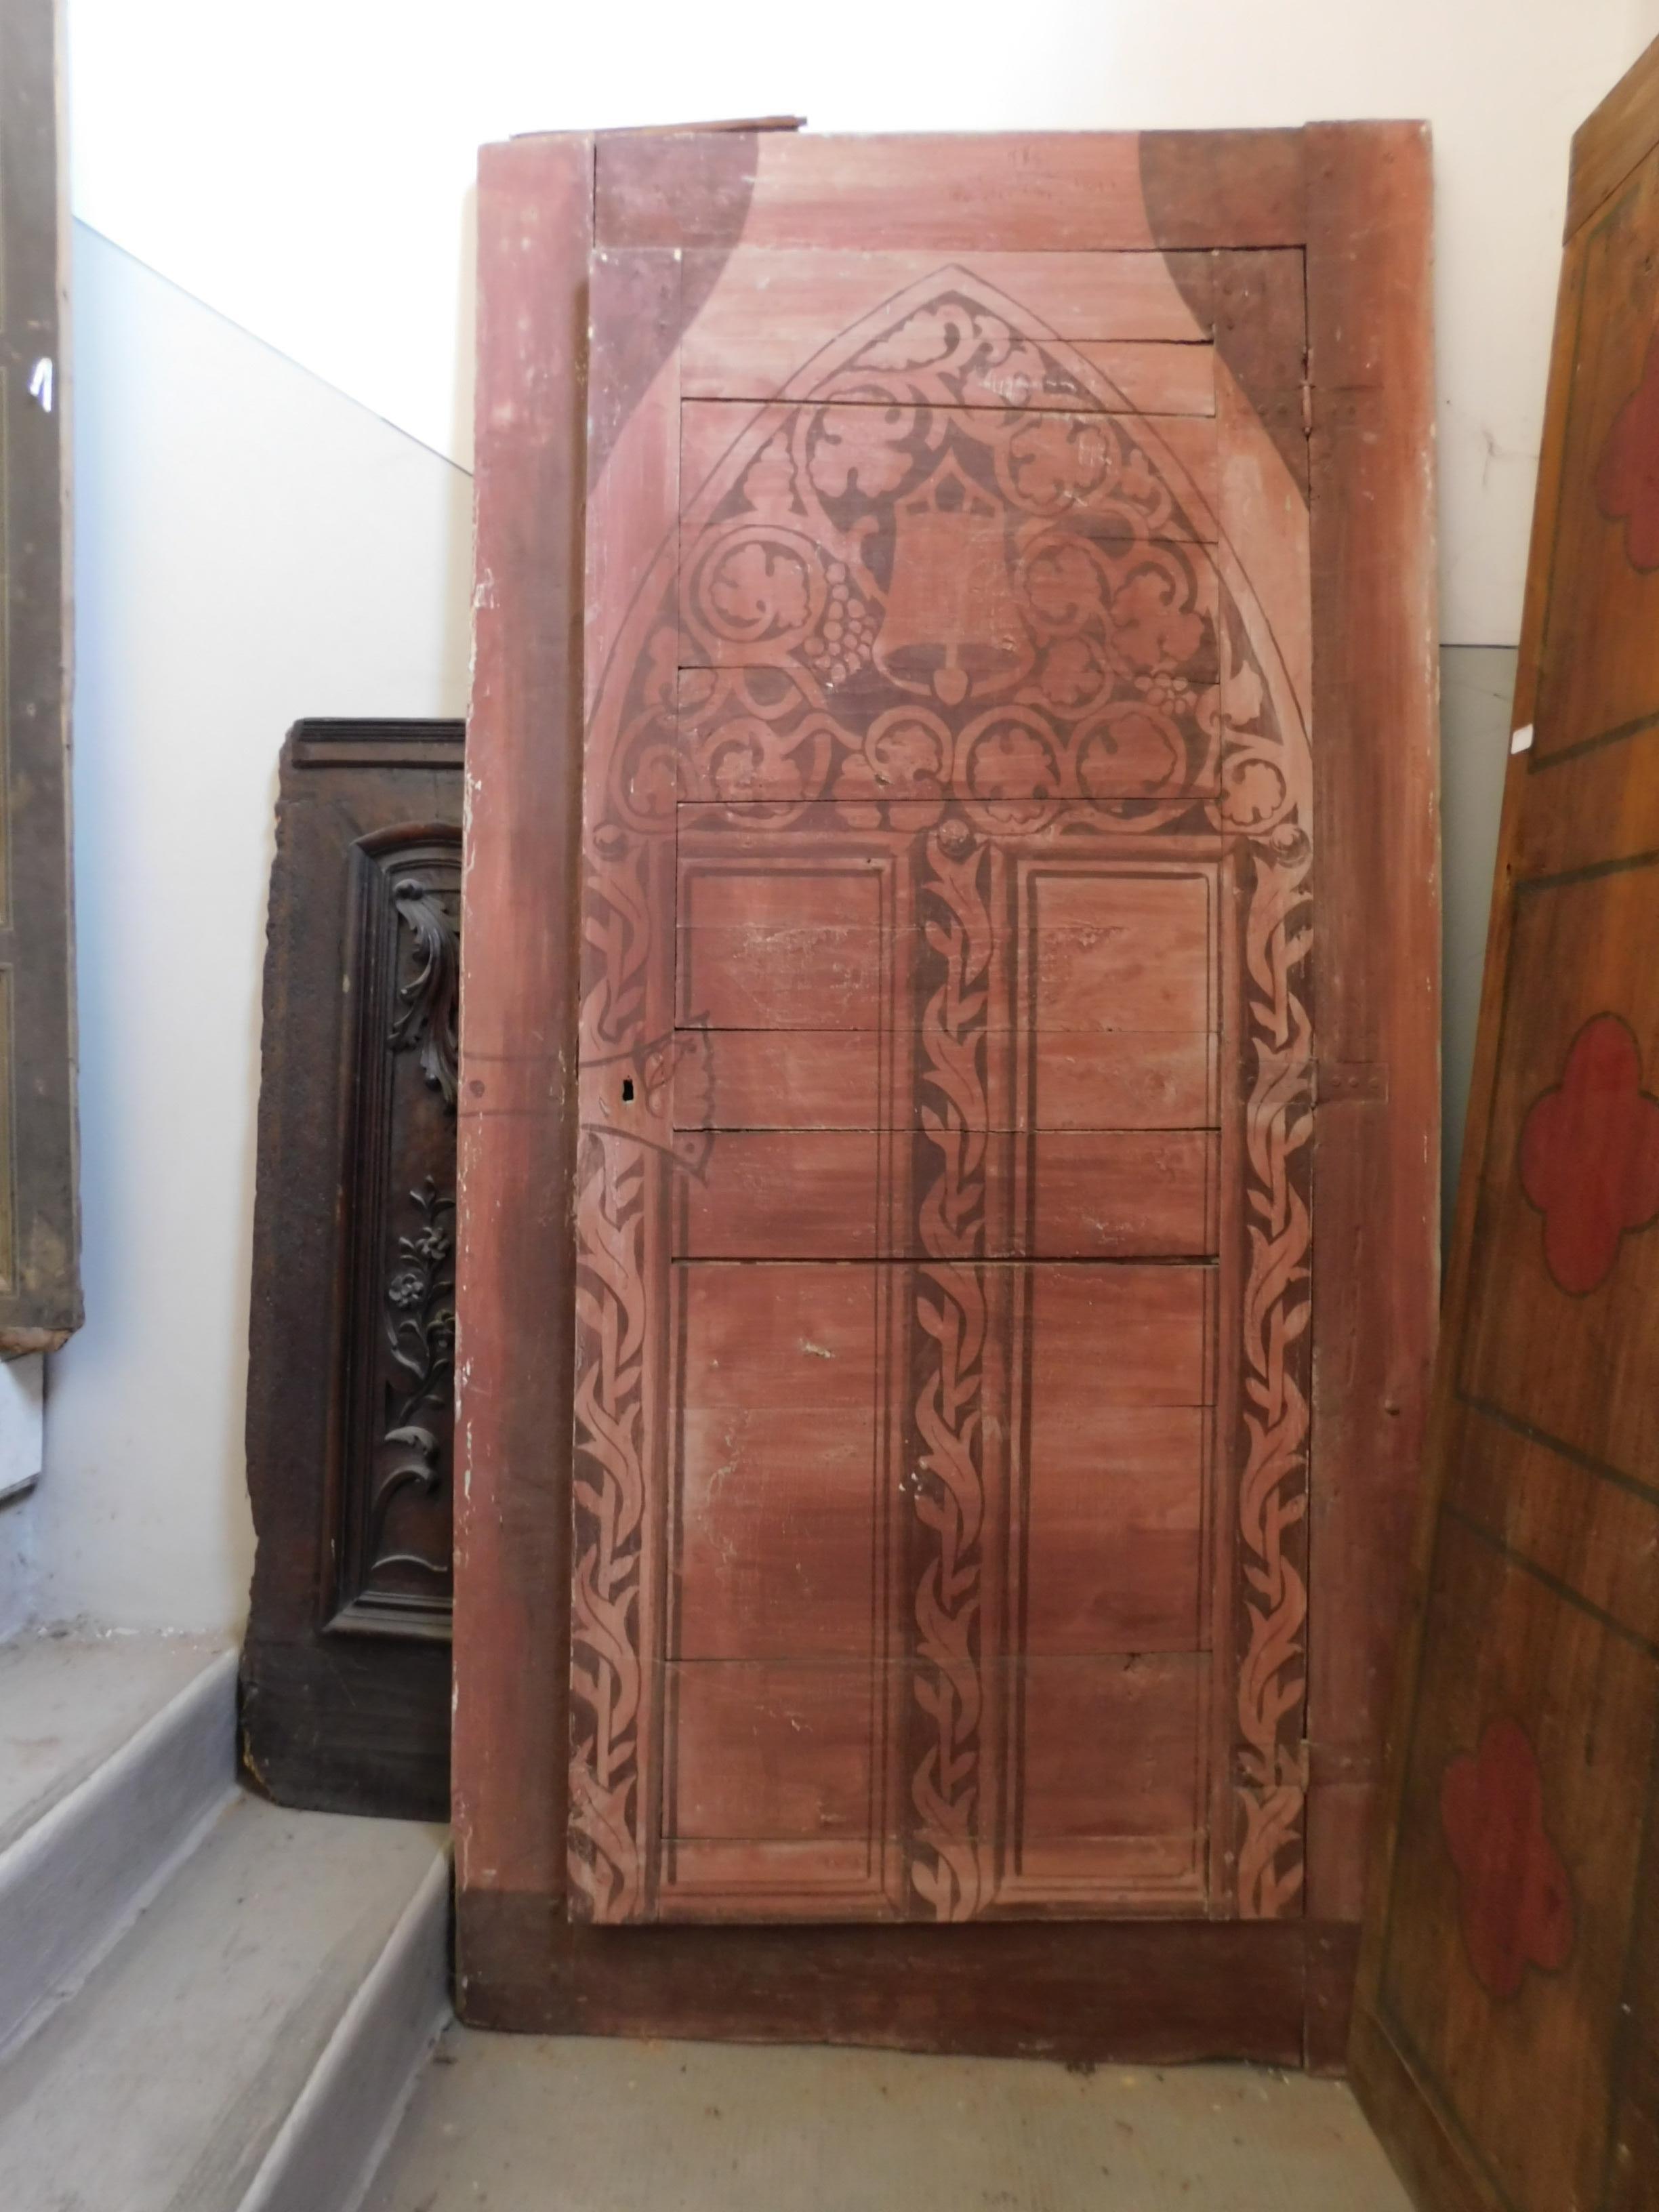 Ancient wall placard, cupboard, can also be used as an interior door if the lower base is cut, in soft wood, red painted with arched motifs, almost arabesque and with vines or vegetation, from the Langhe winery in Italy, built in the epoch 800,